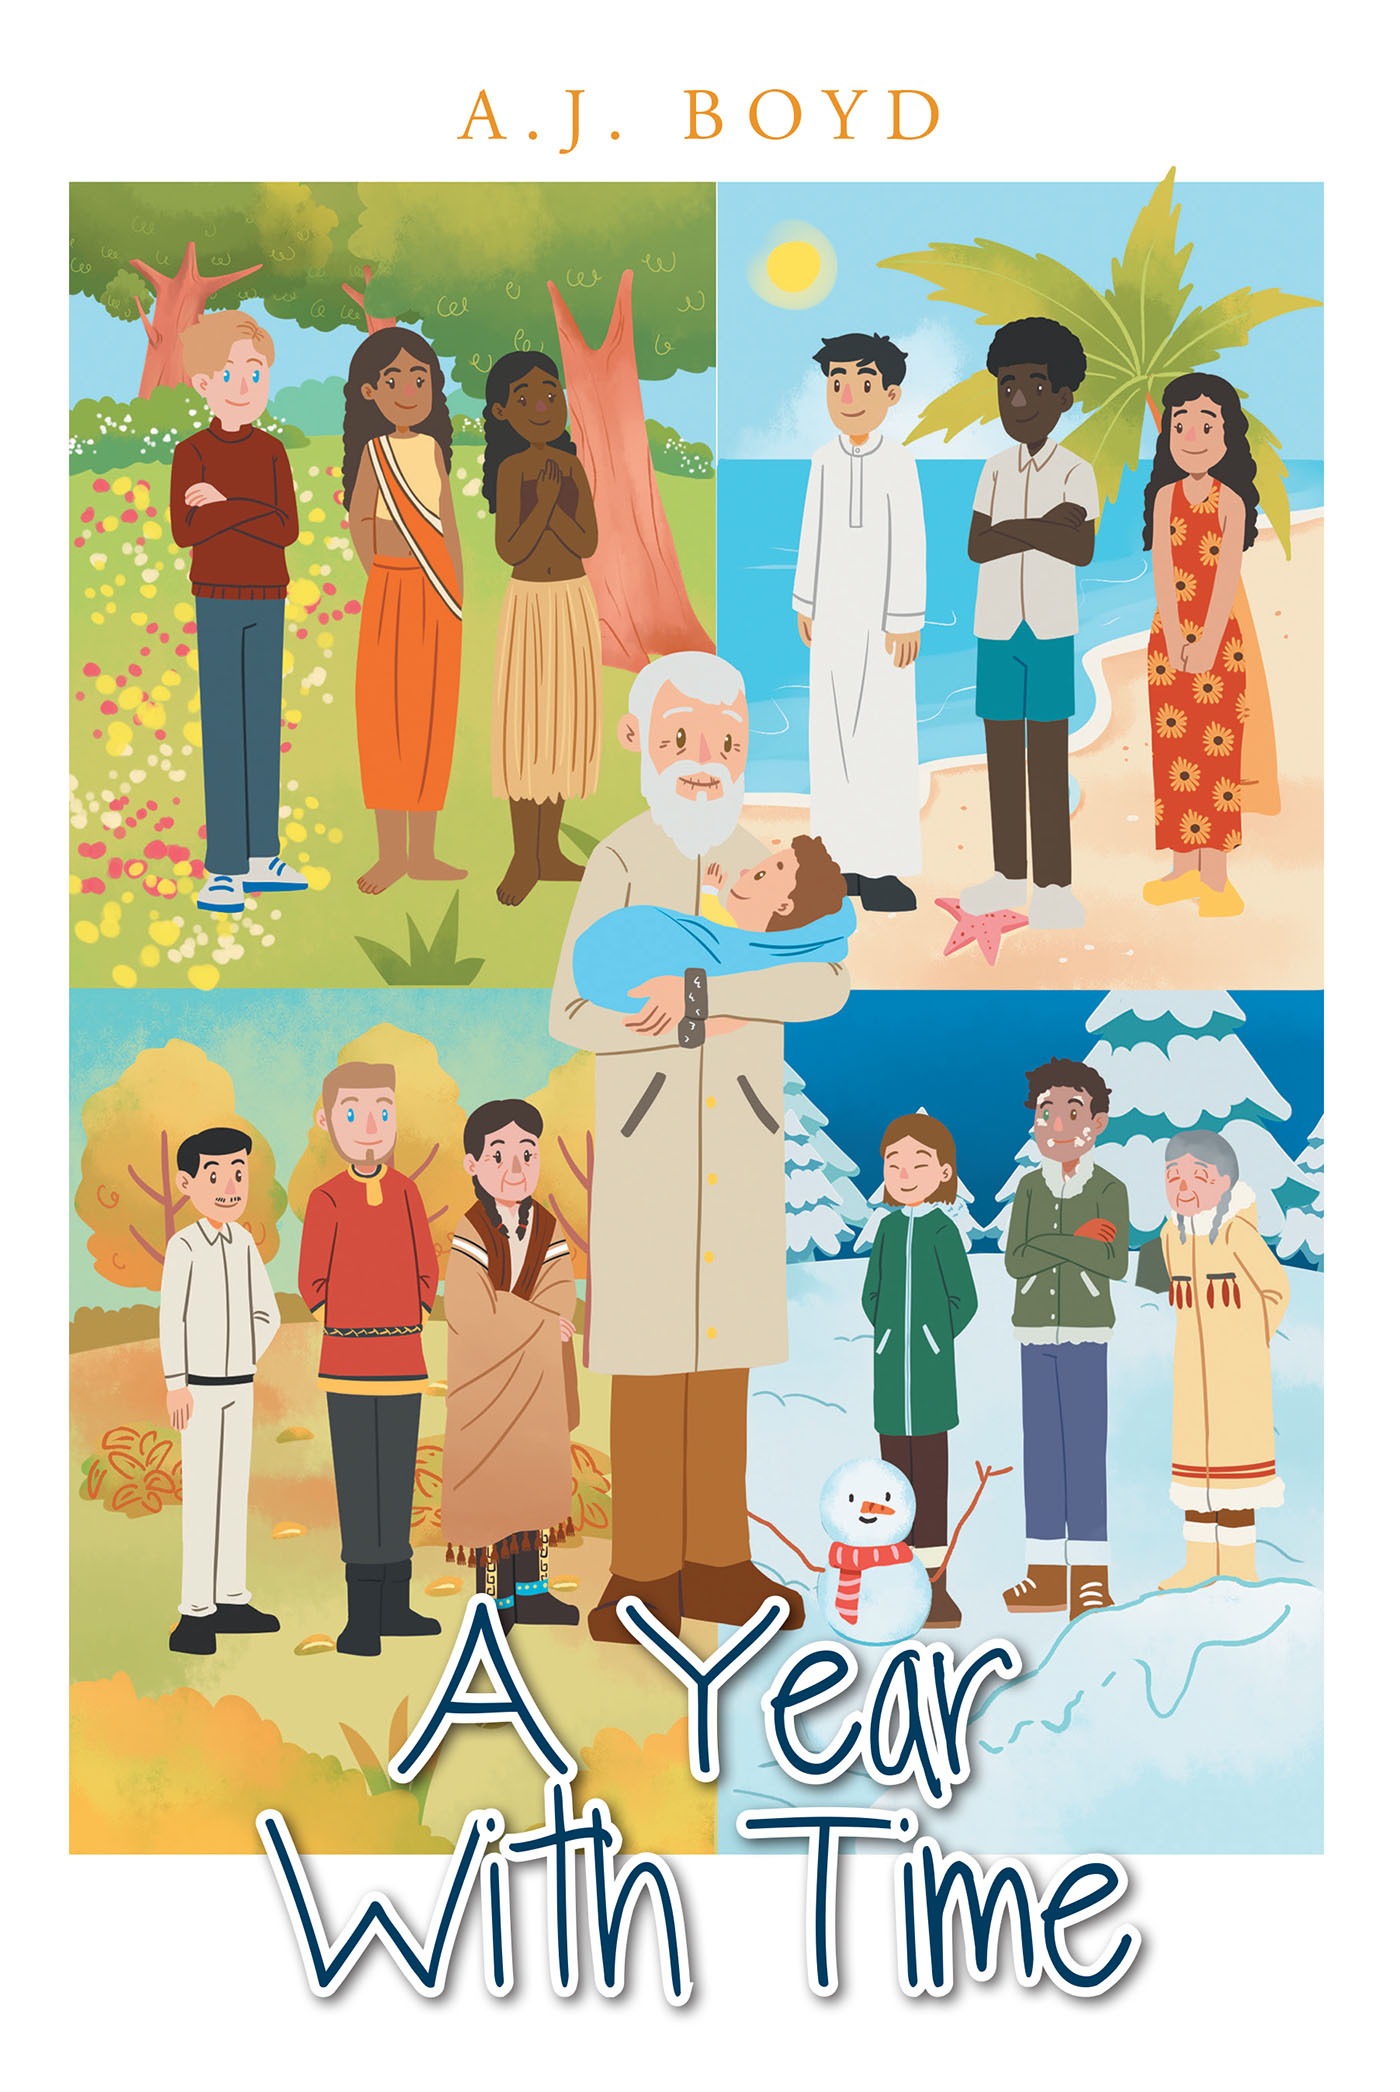 Author A.J. Boyd’s New Book, "A Year With Time," is a Compelling Children’s Story About the Fascinating and Lyrical Journey of Time